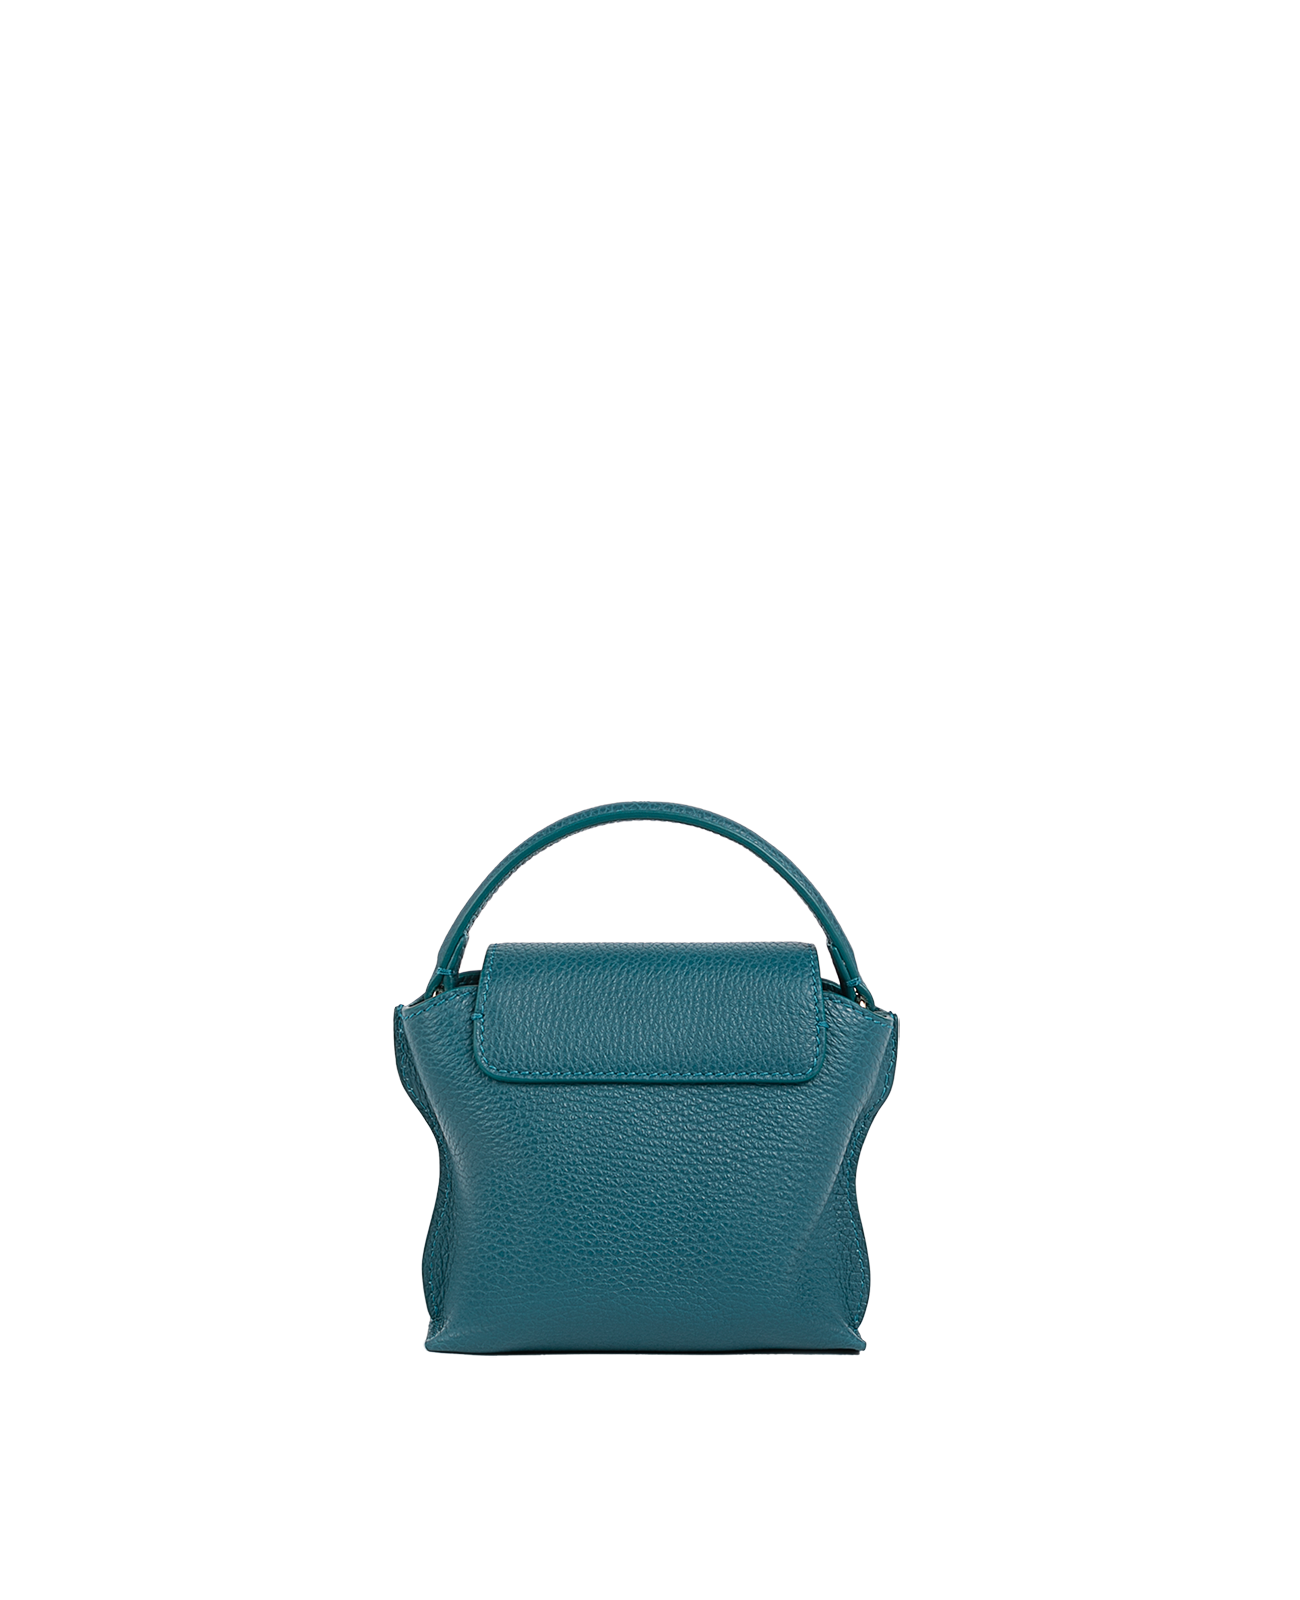 Cross-body bag in Italian full-grain leather, semi-aniline calf Italian leather with detachable shoulder strap.Three compartments, zip pocket in the back compartment. Magnetic flap closure with logo. Color: Teal. Size:Mini